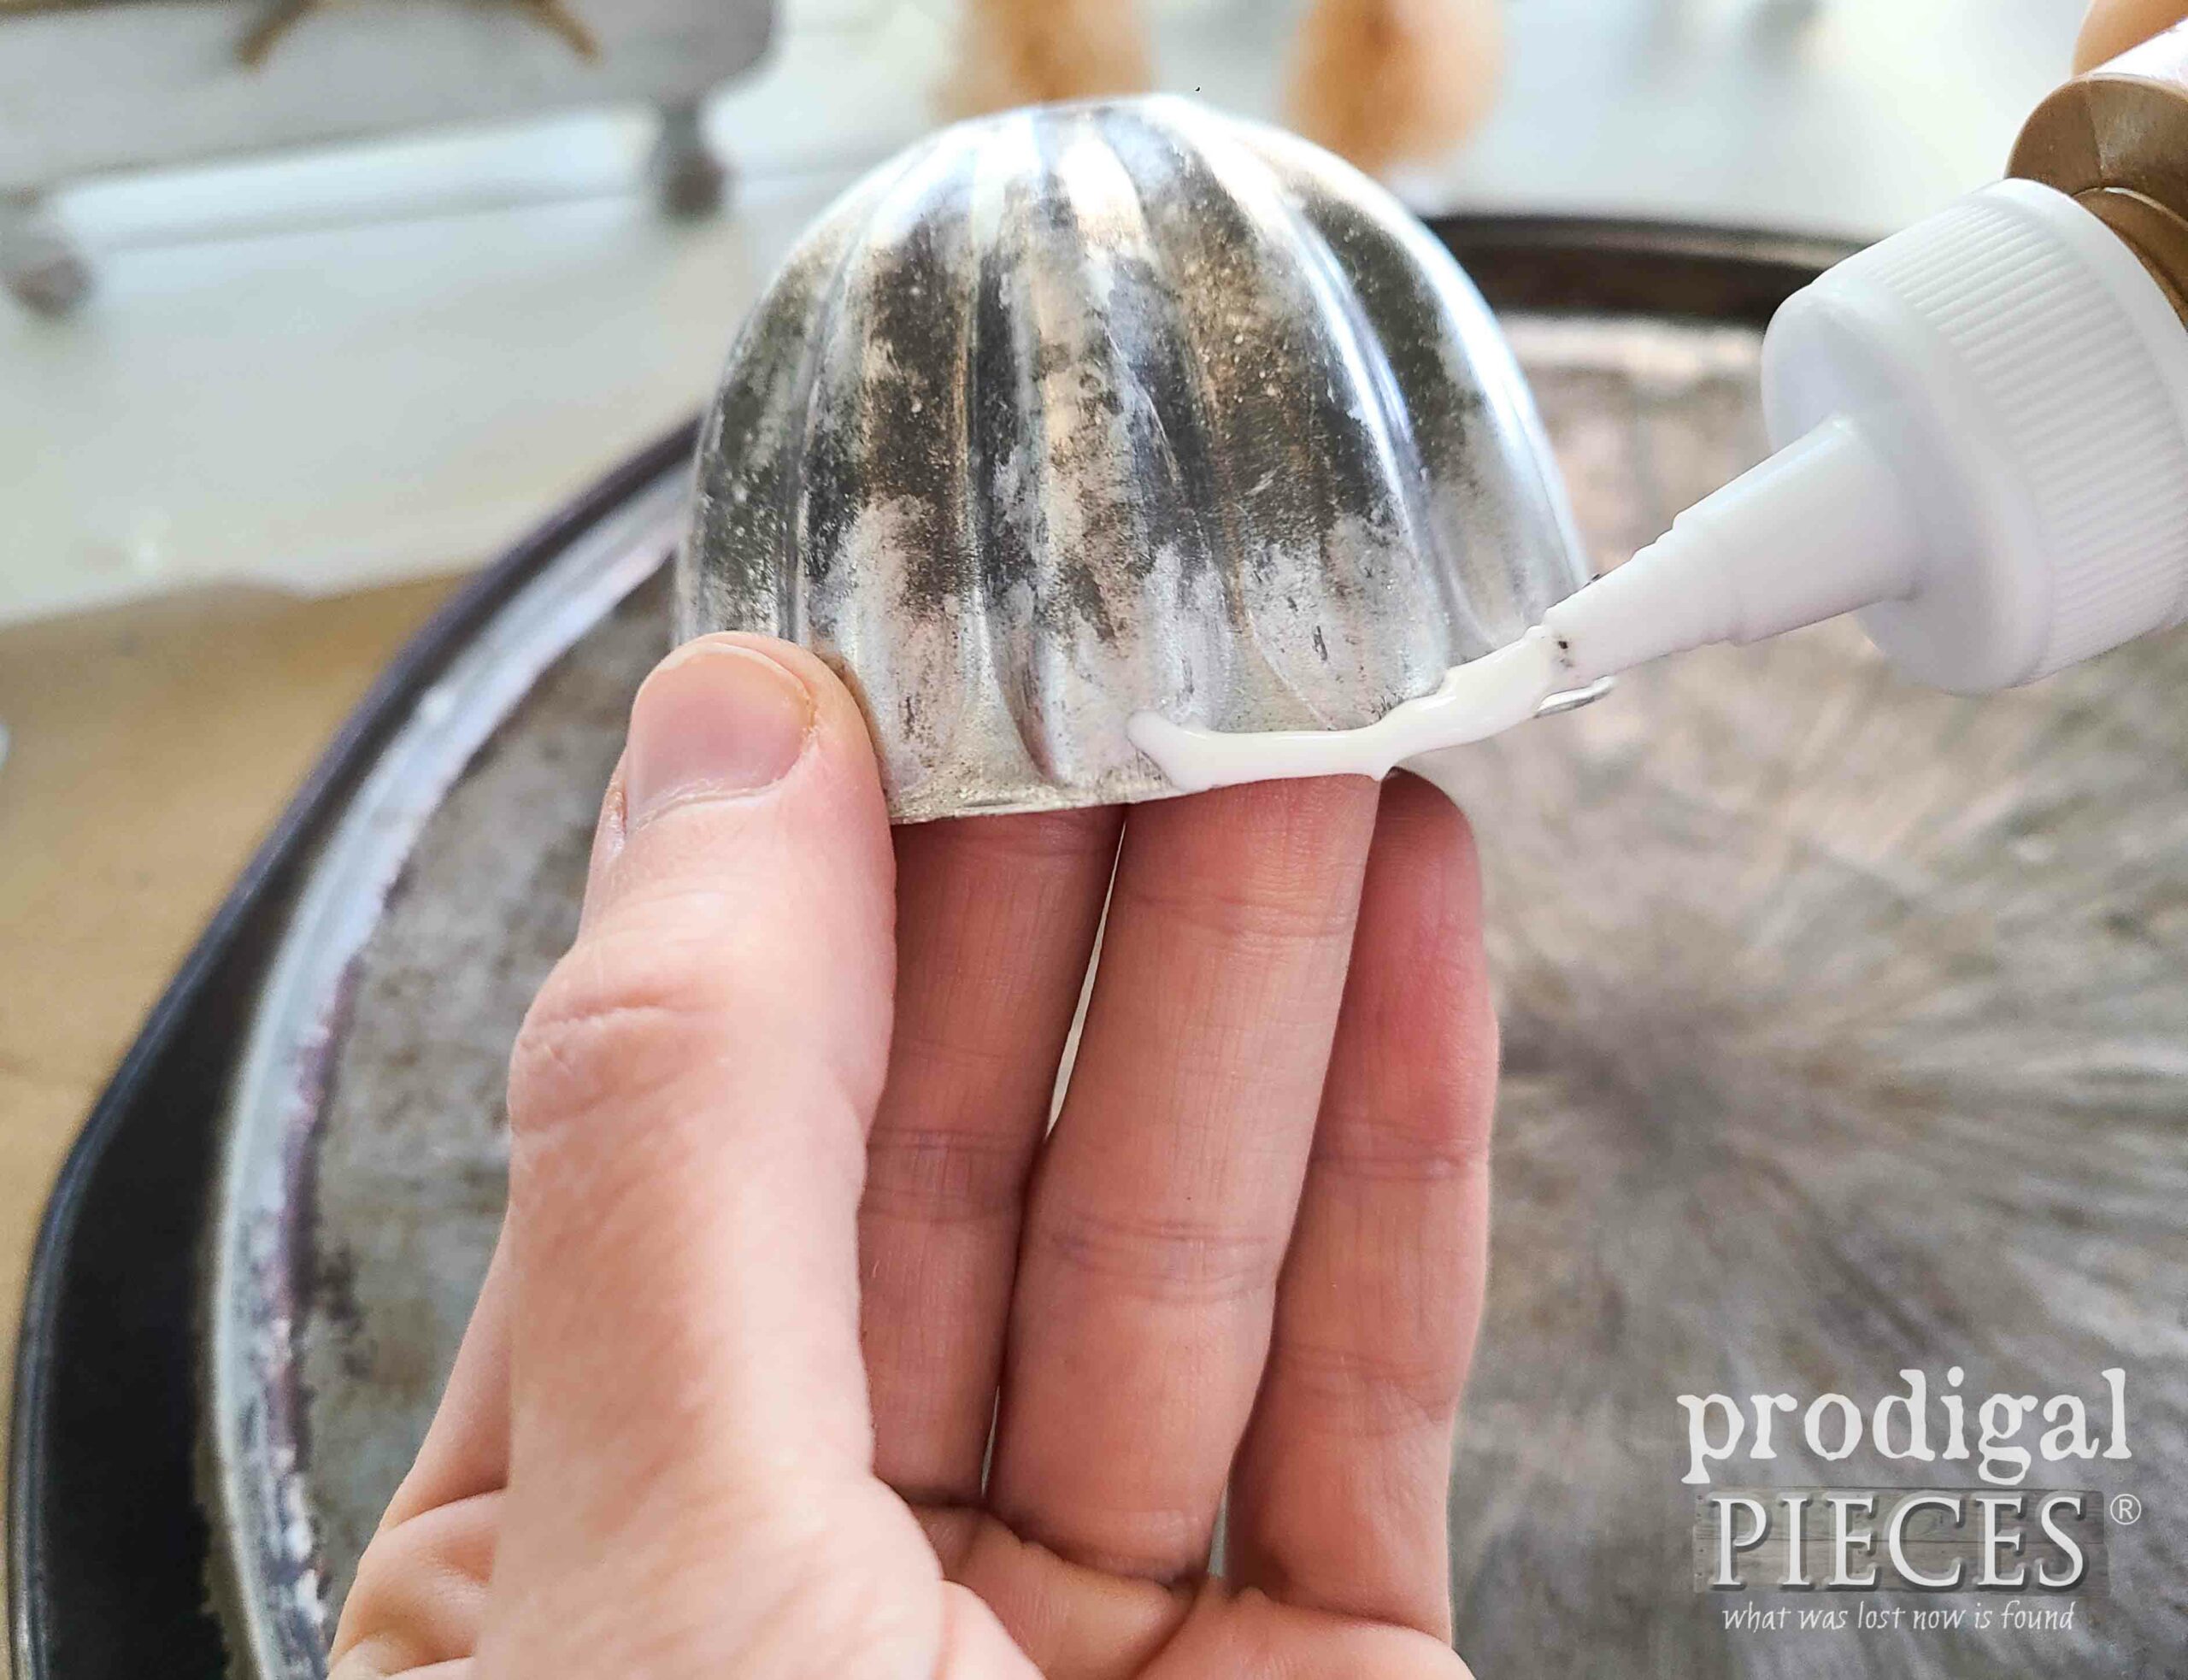 Applying Tacky Glue to Vintage Jello Mold for Repurposed Christmas Ornaments | prodigalpieces.com #prodigalpieces